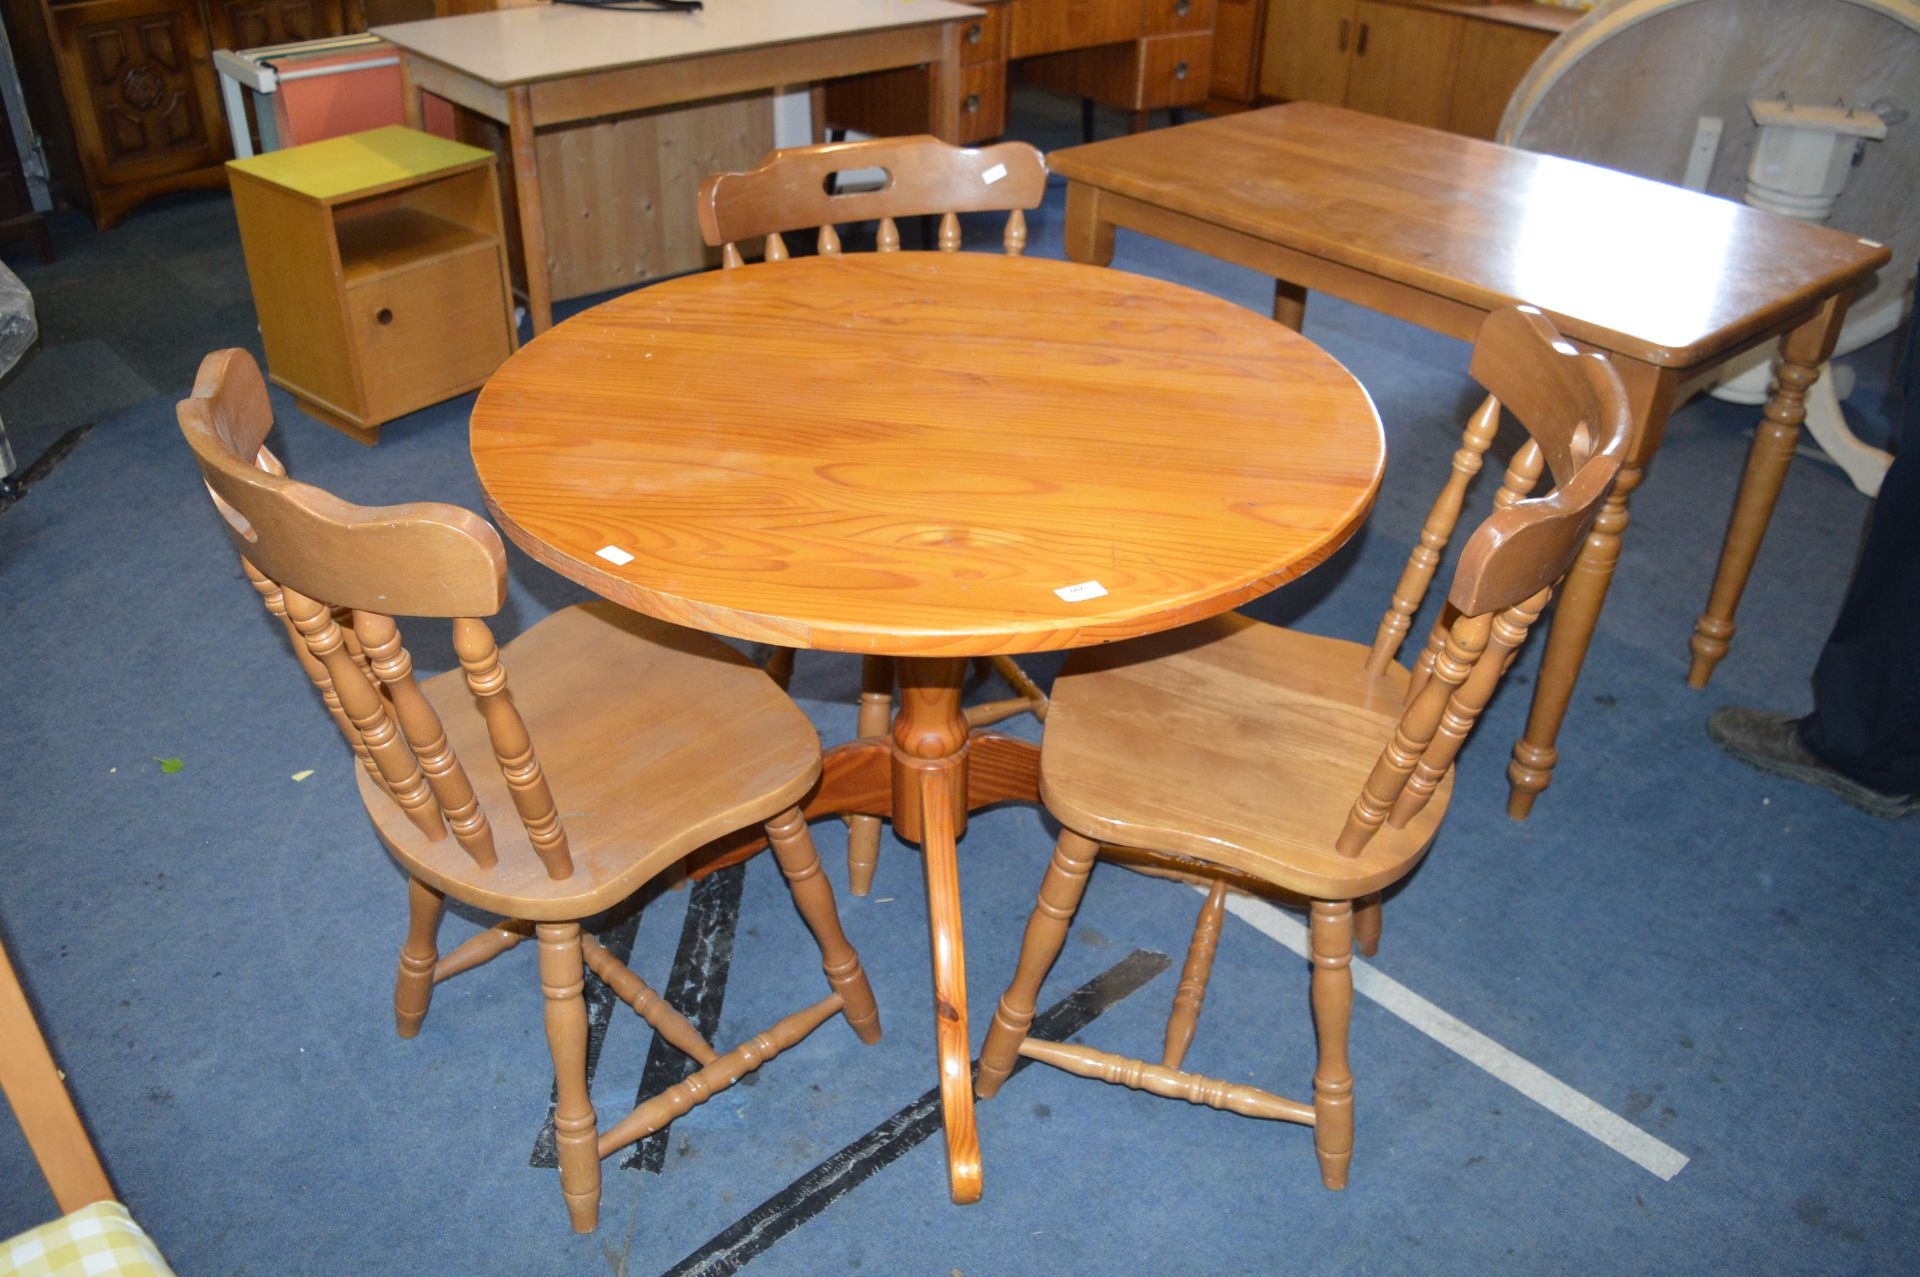 Circular Pine Dining Table with Three Chairs